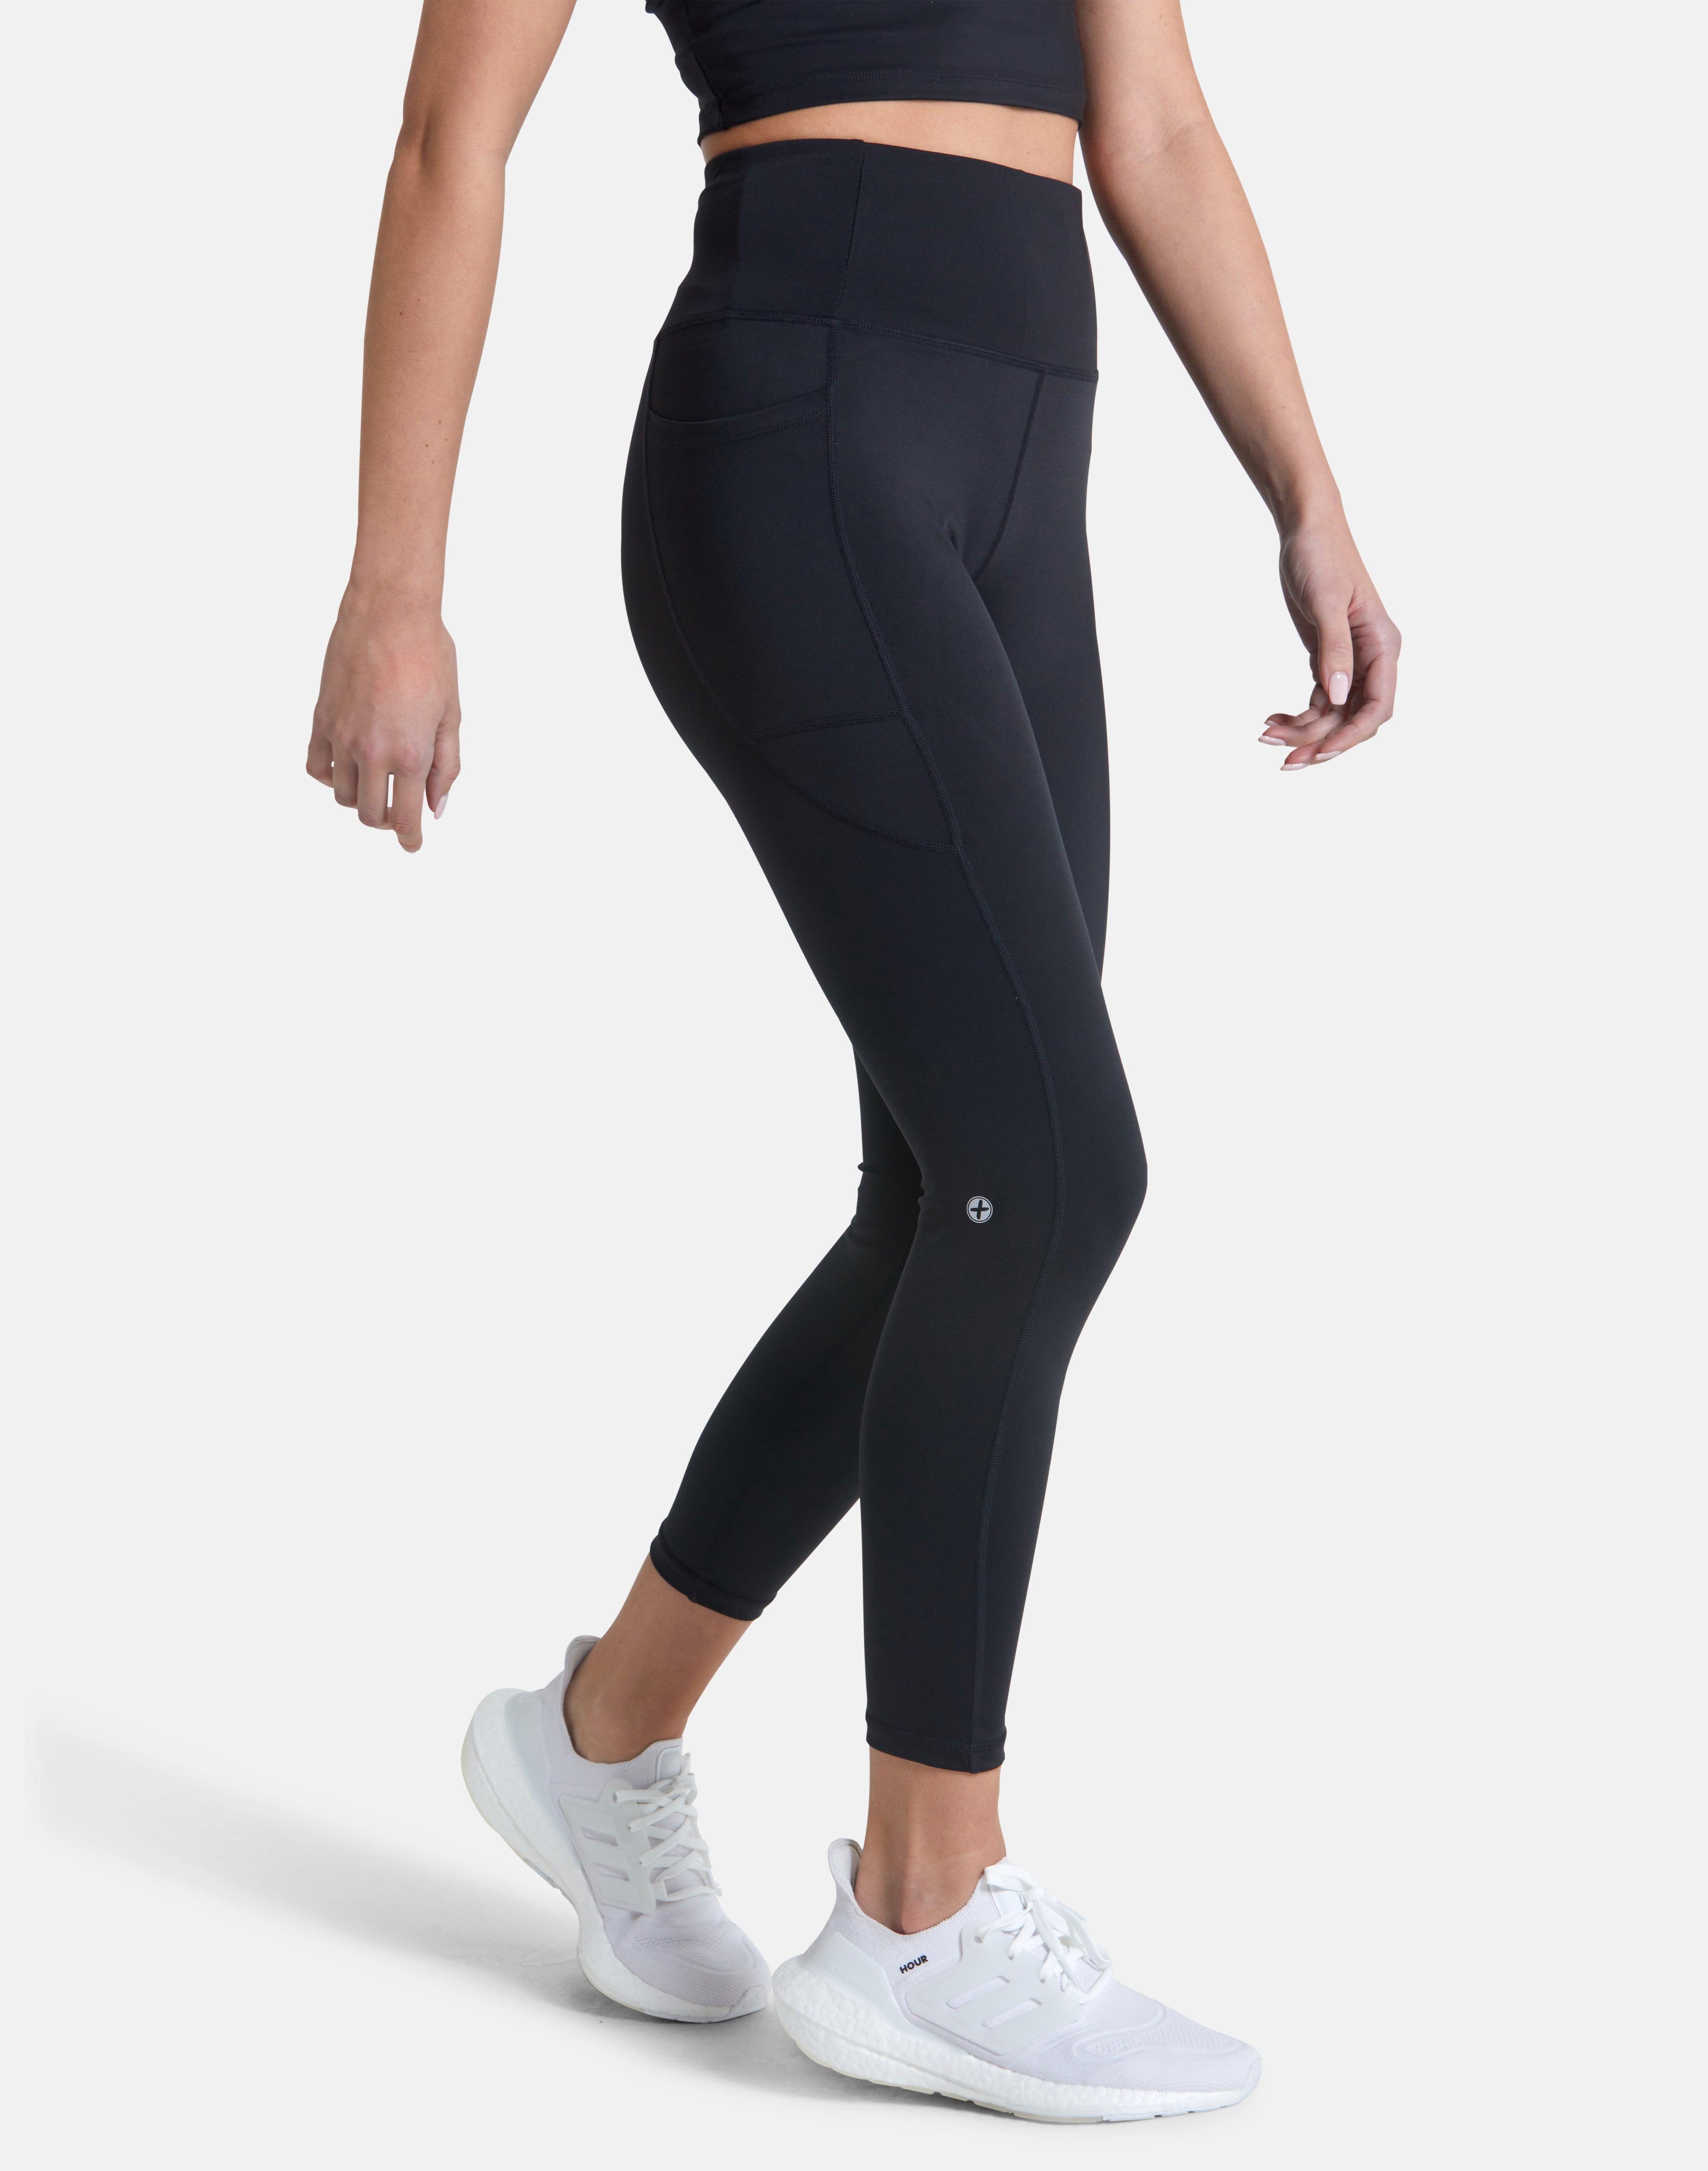 Rain Fitness Boutique - Plot twist: Your fancy going out leggings are the  same as your working out leggings.😉 Alloy Ombre Black on Black Leggings   leggings?_pos=1&_sid